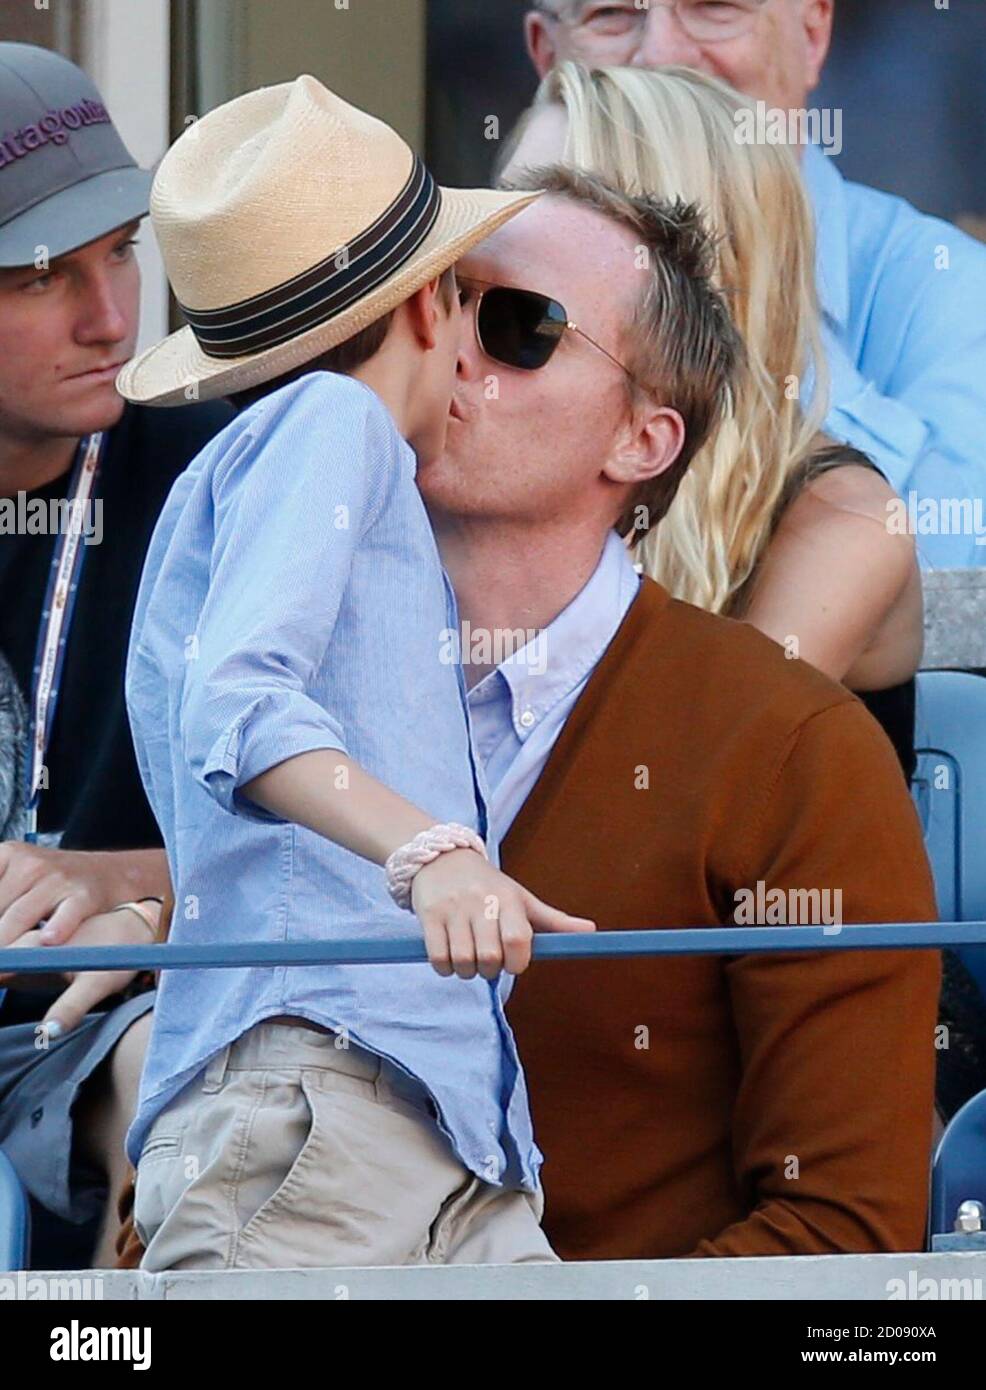 Actor Paul Bettany kisses his son Stellan in the gallery at the U.S. Open  tennis tournament in New York, September 9, 2012. REUTERS/Mike Segar  (UNITED STATES - Tags: SPORT TENNIS ENTERTAINMENT Stock